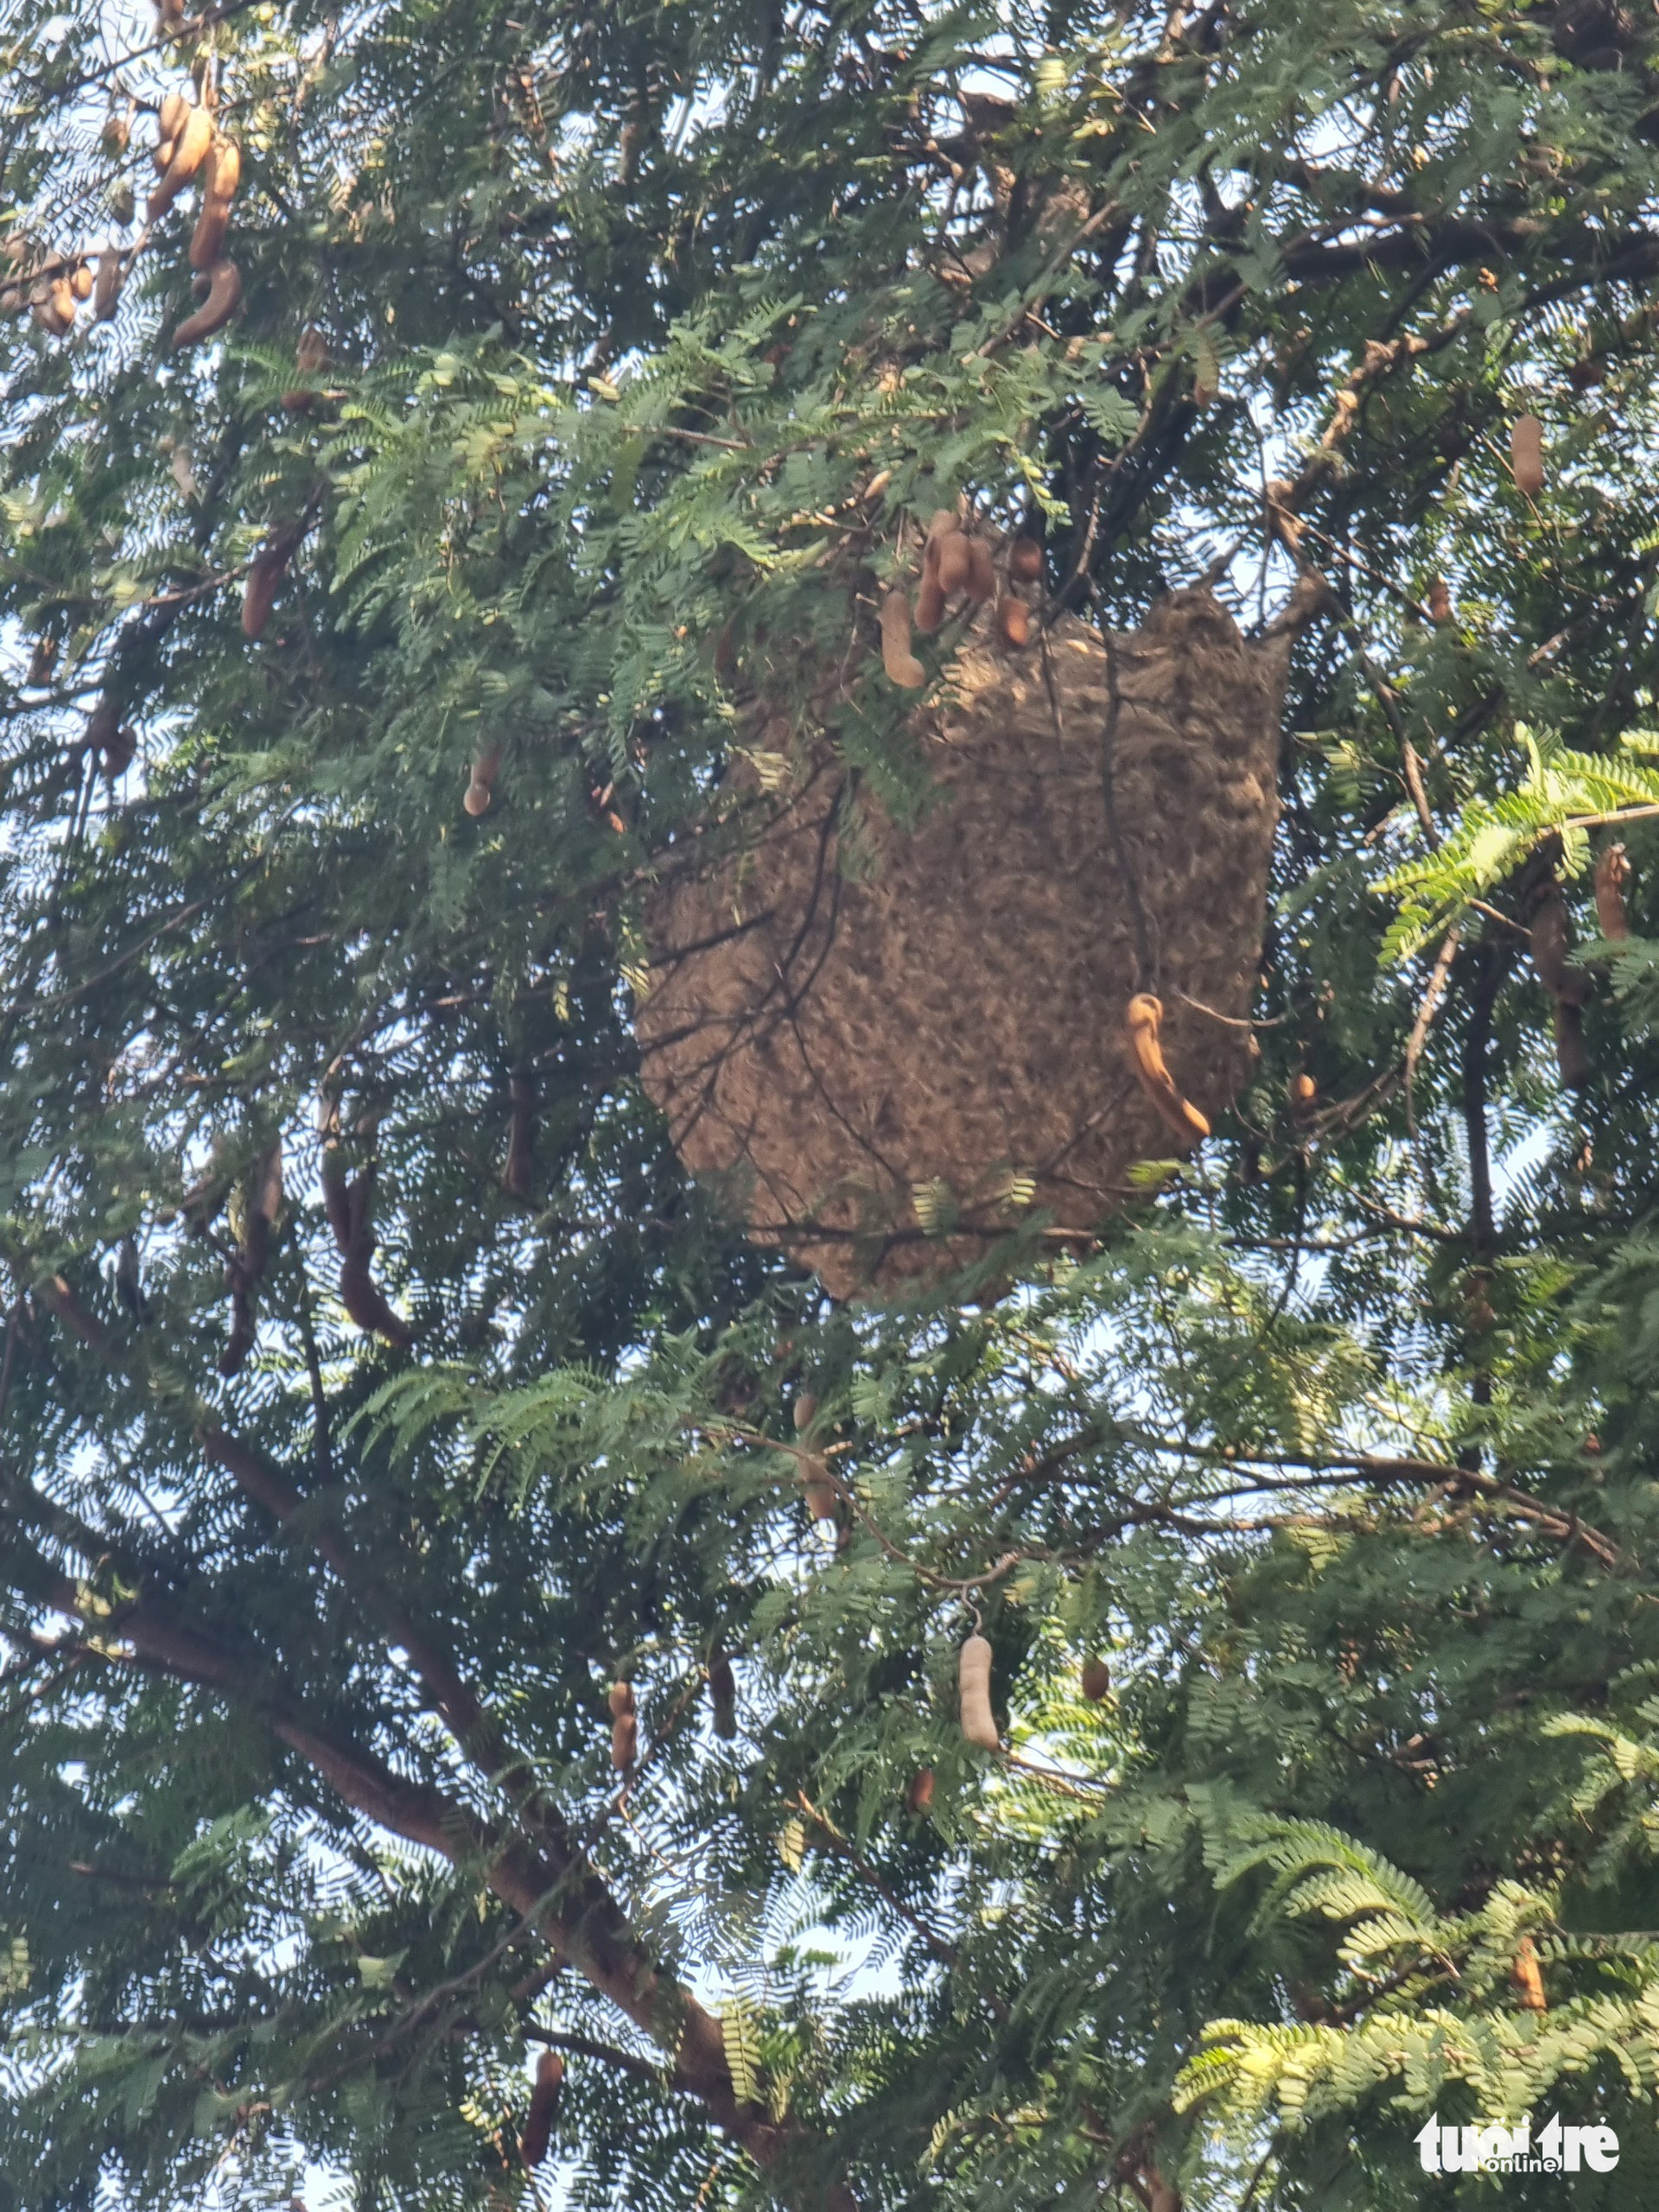 The beehive is located on a tamarind tree on Nguyen Du Street in District 1, Ho Chi Minh City on March 30, 2022. Photo by courtesy of PC07